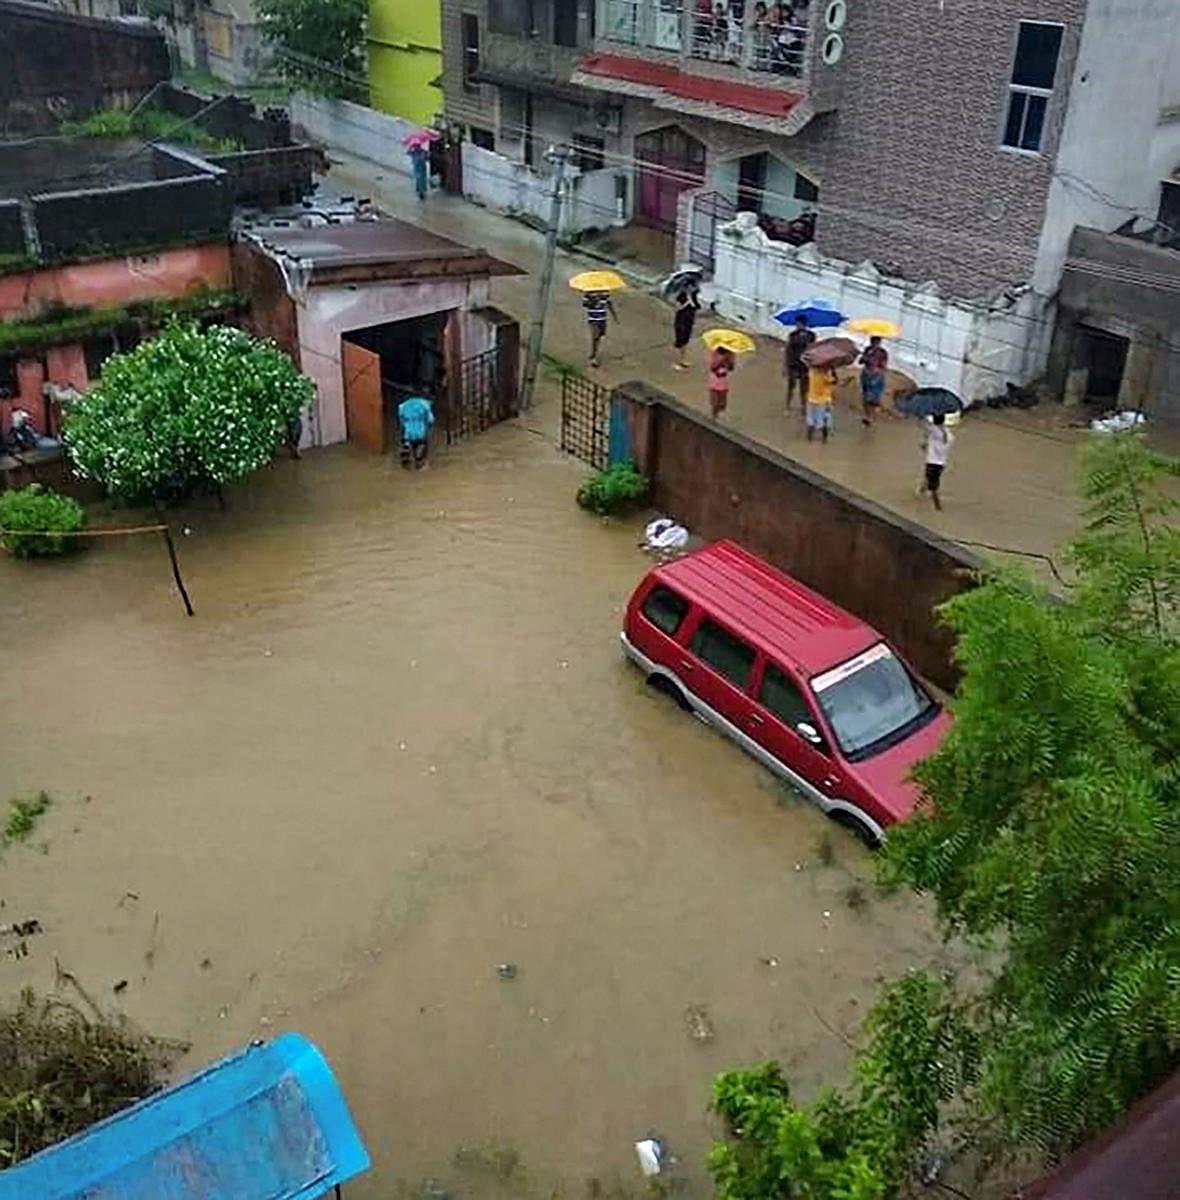 Balangir: Cars and houses submerged in floodwater following heavy monsoon rain, in Balangir district of Odisha, Wednesday, Aug 14, 2019. (PTI Photo)